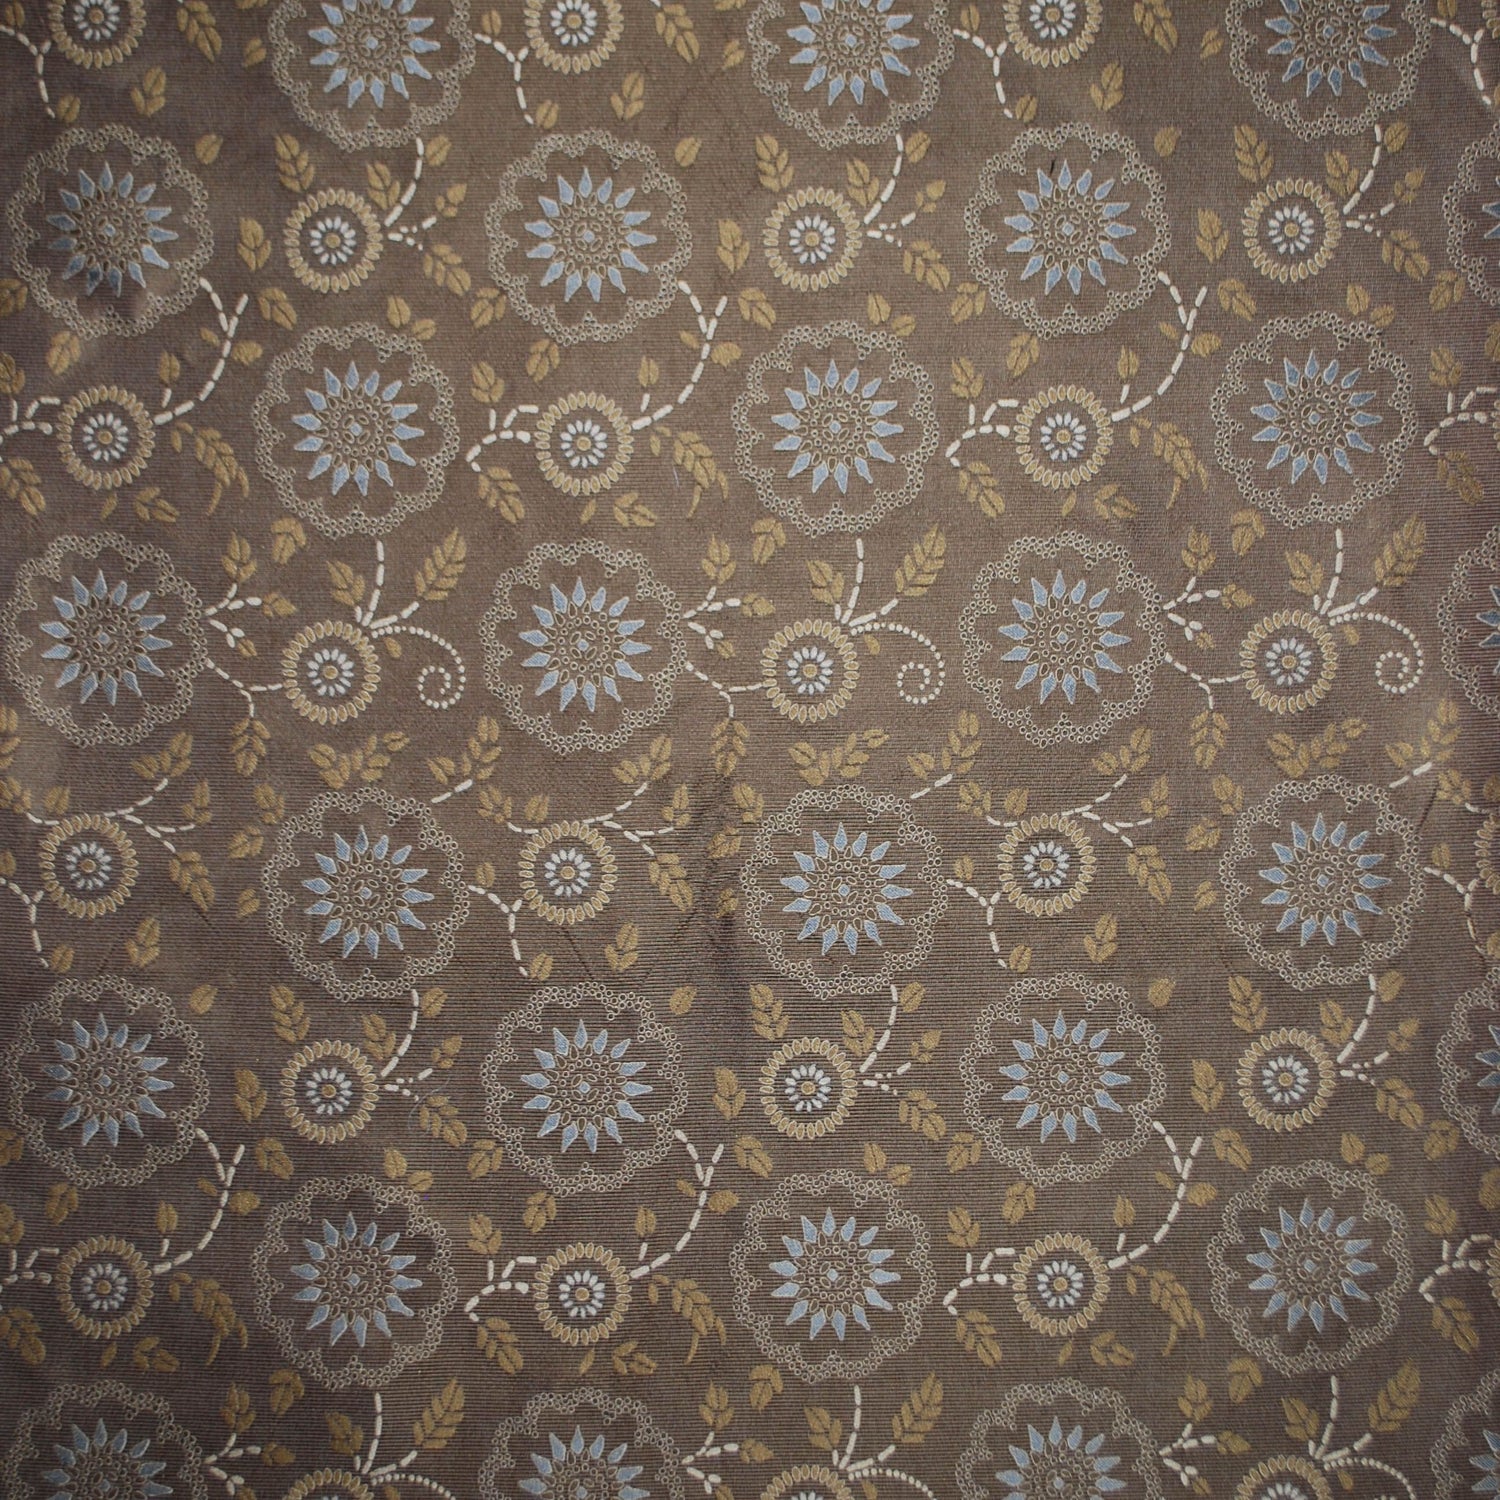 Kasumi fabric in chocolate color - pattern number ZB 0003WKE4 - by Scalamandre in the Old World Weavers collection